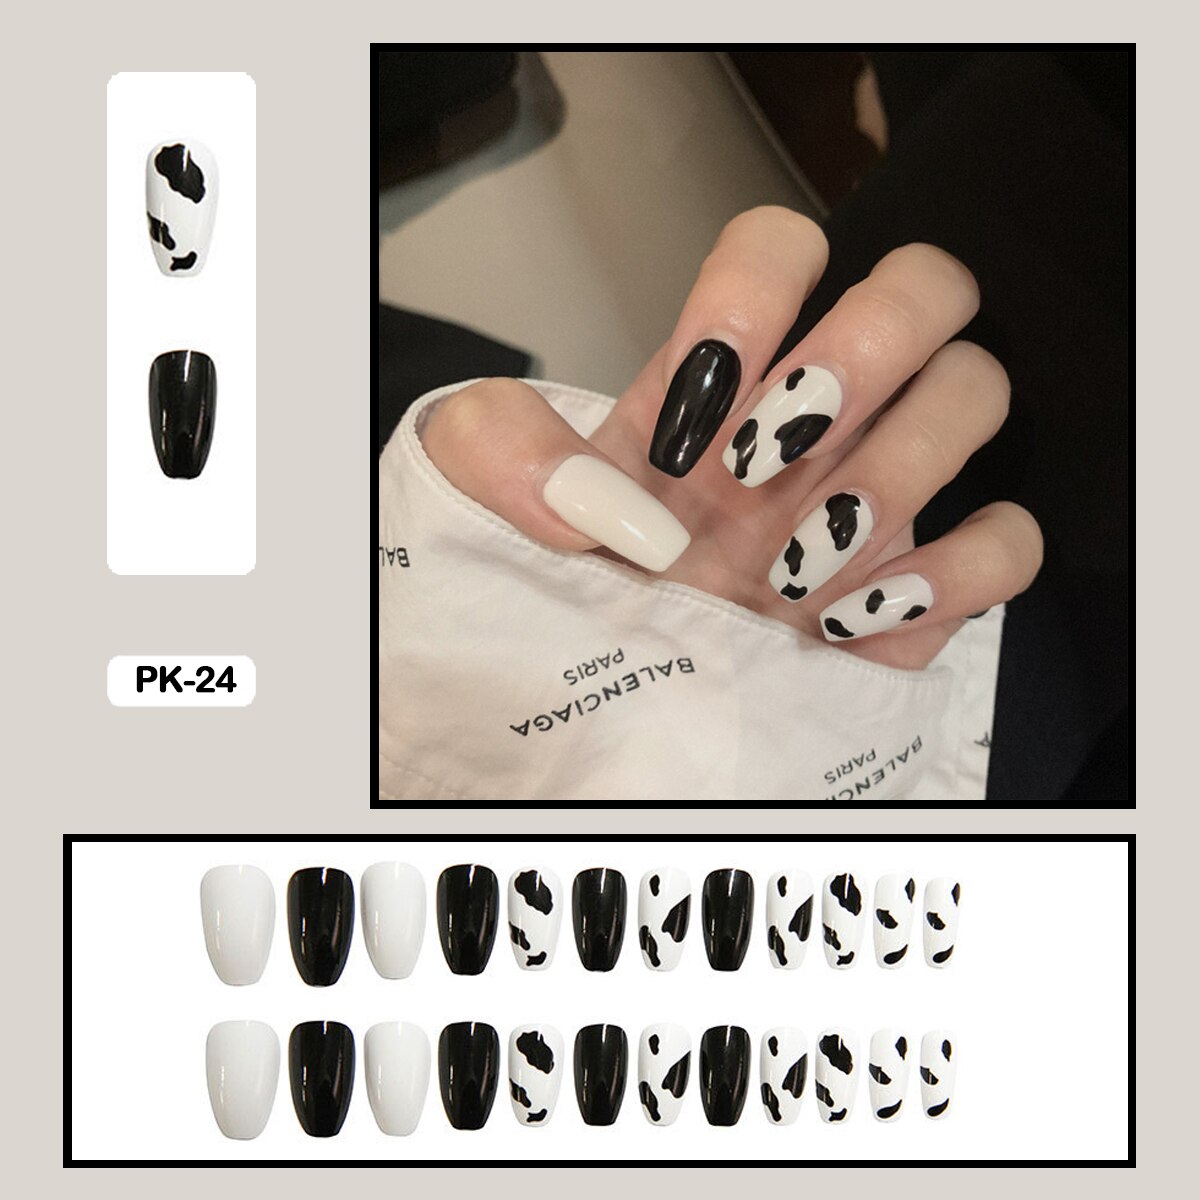 Graduation gifts Black And White Cow Pattern Nail Art Wearable False Nails Fake Nails With Glue 24pcs/box WIth Wearing Tools As Gift